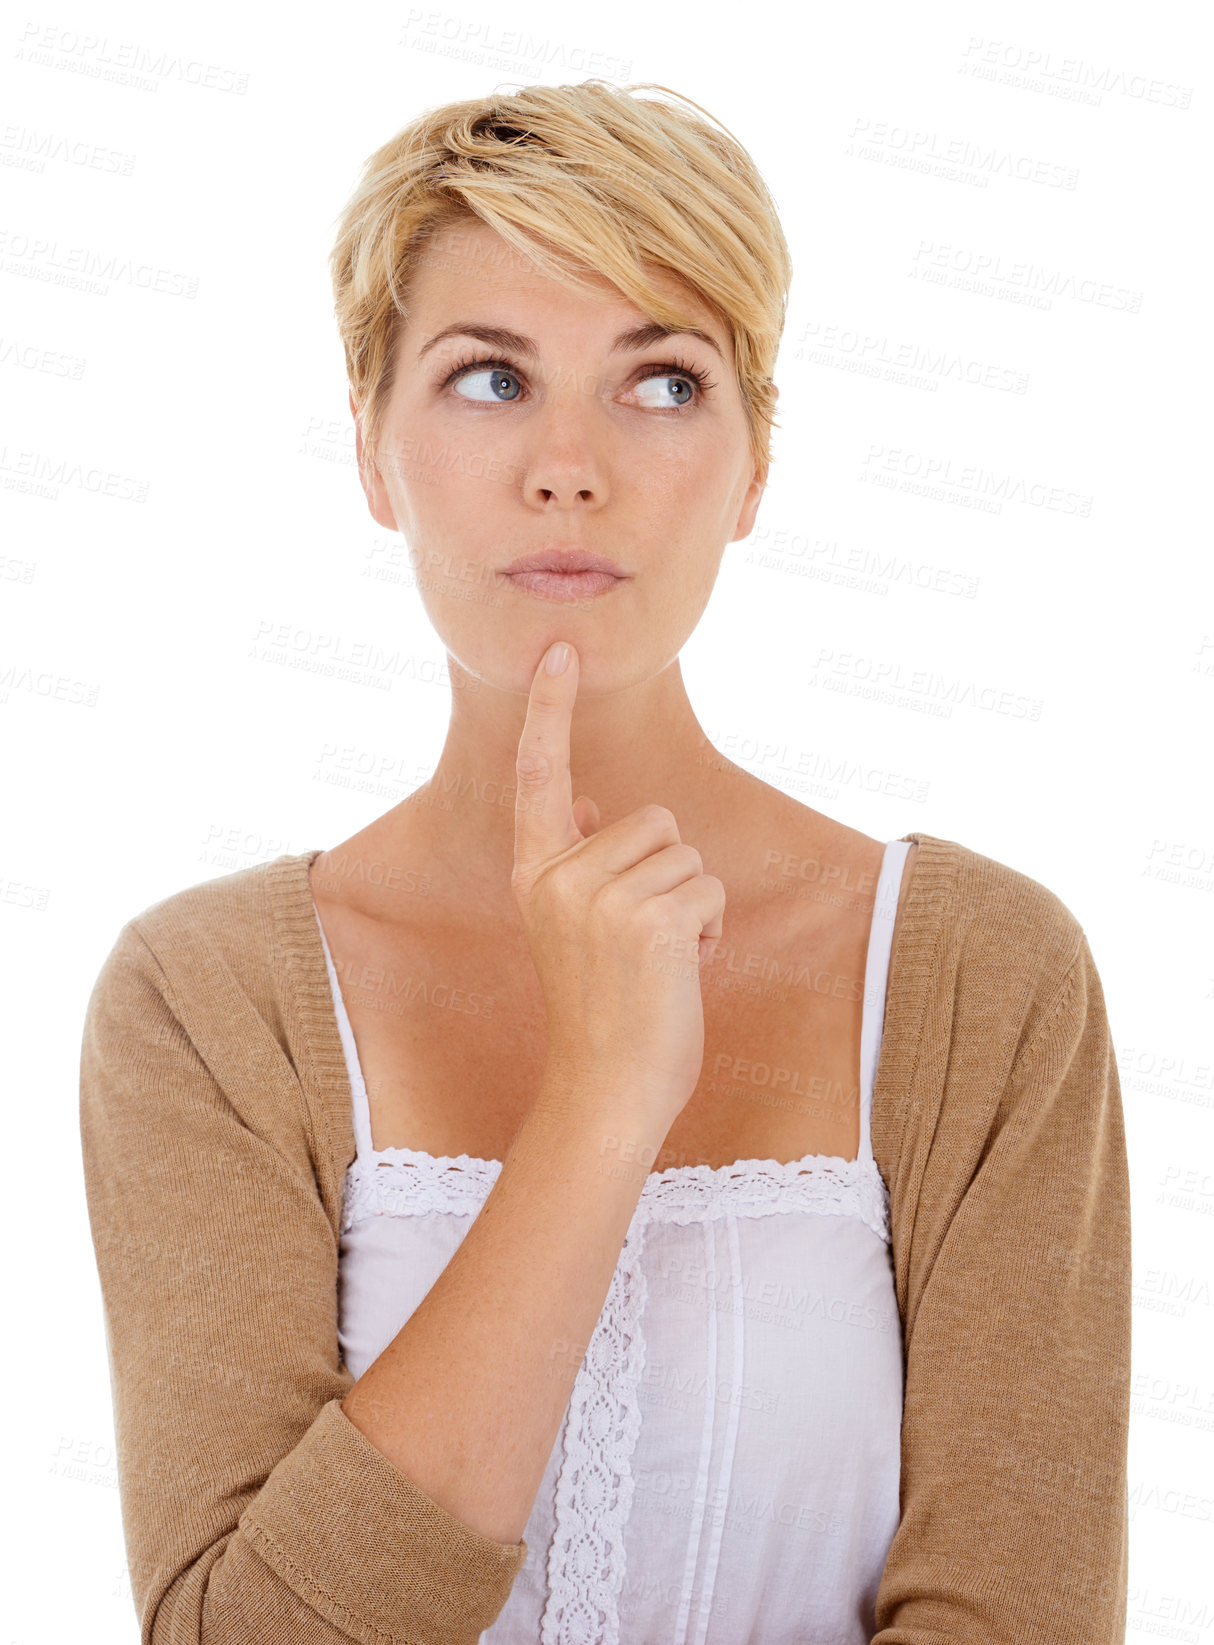 Buy stock photo Studio shot of an attractive woman looking thoughtful against a white background